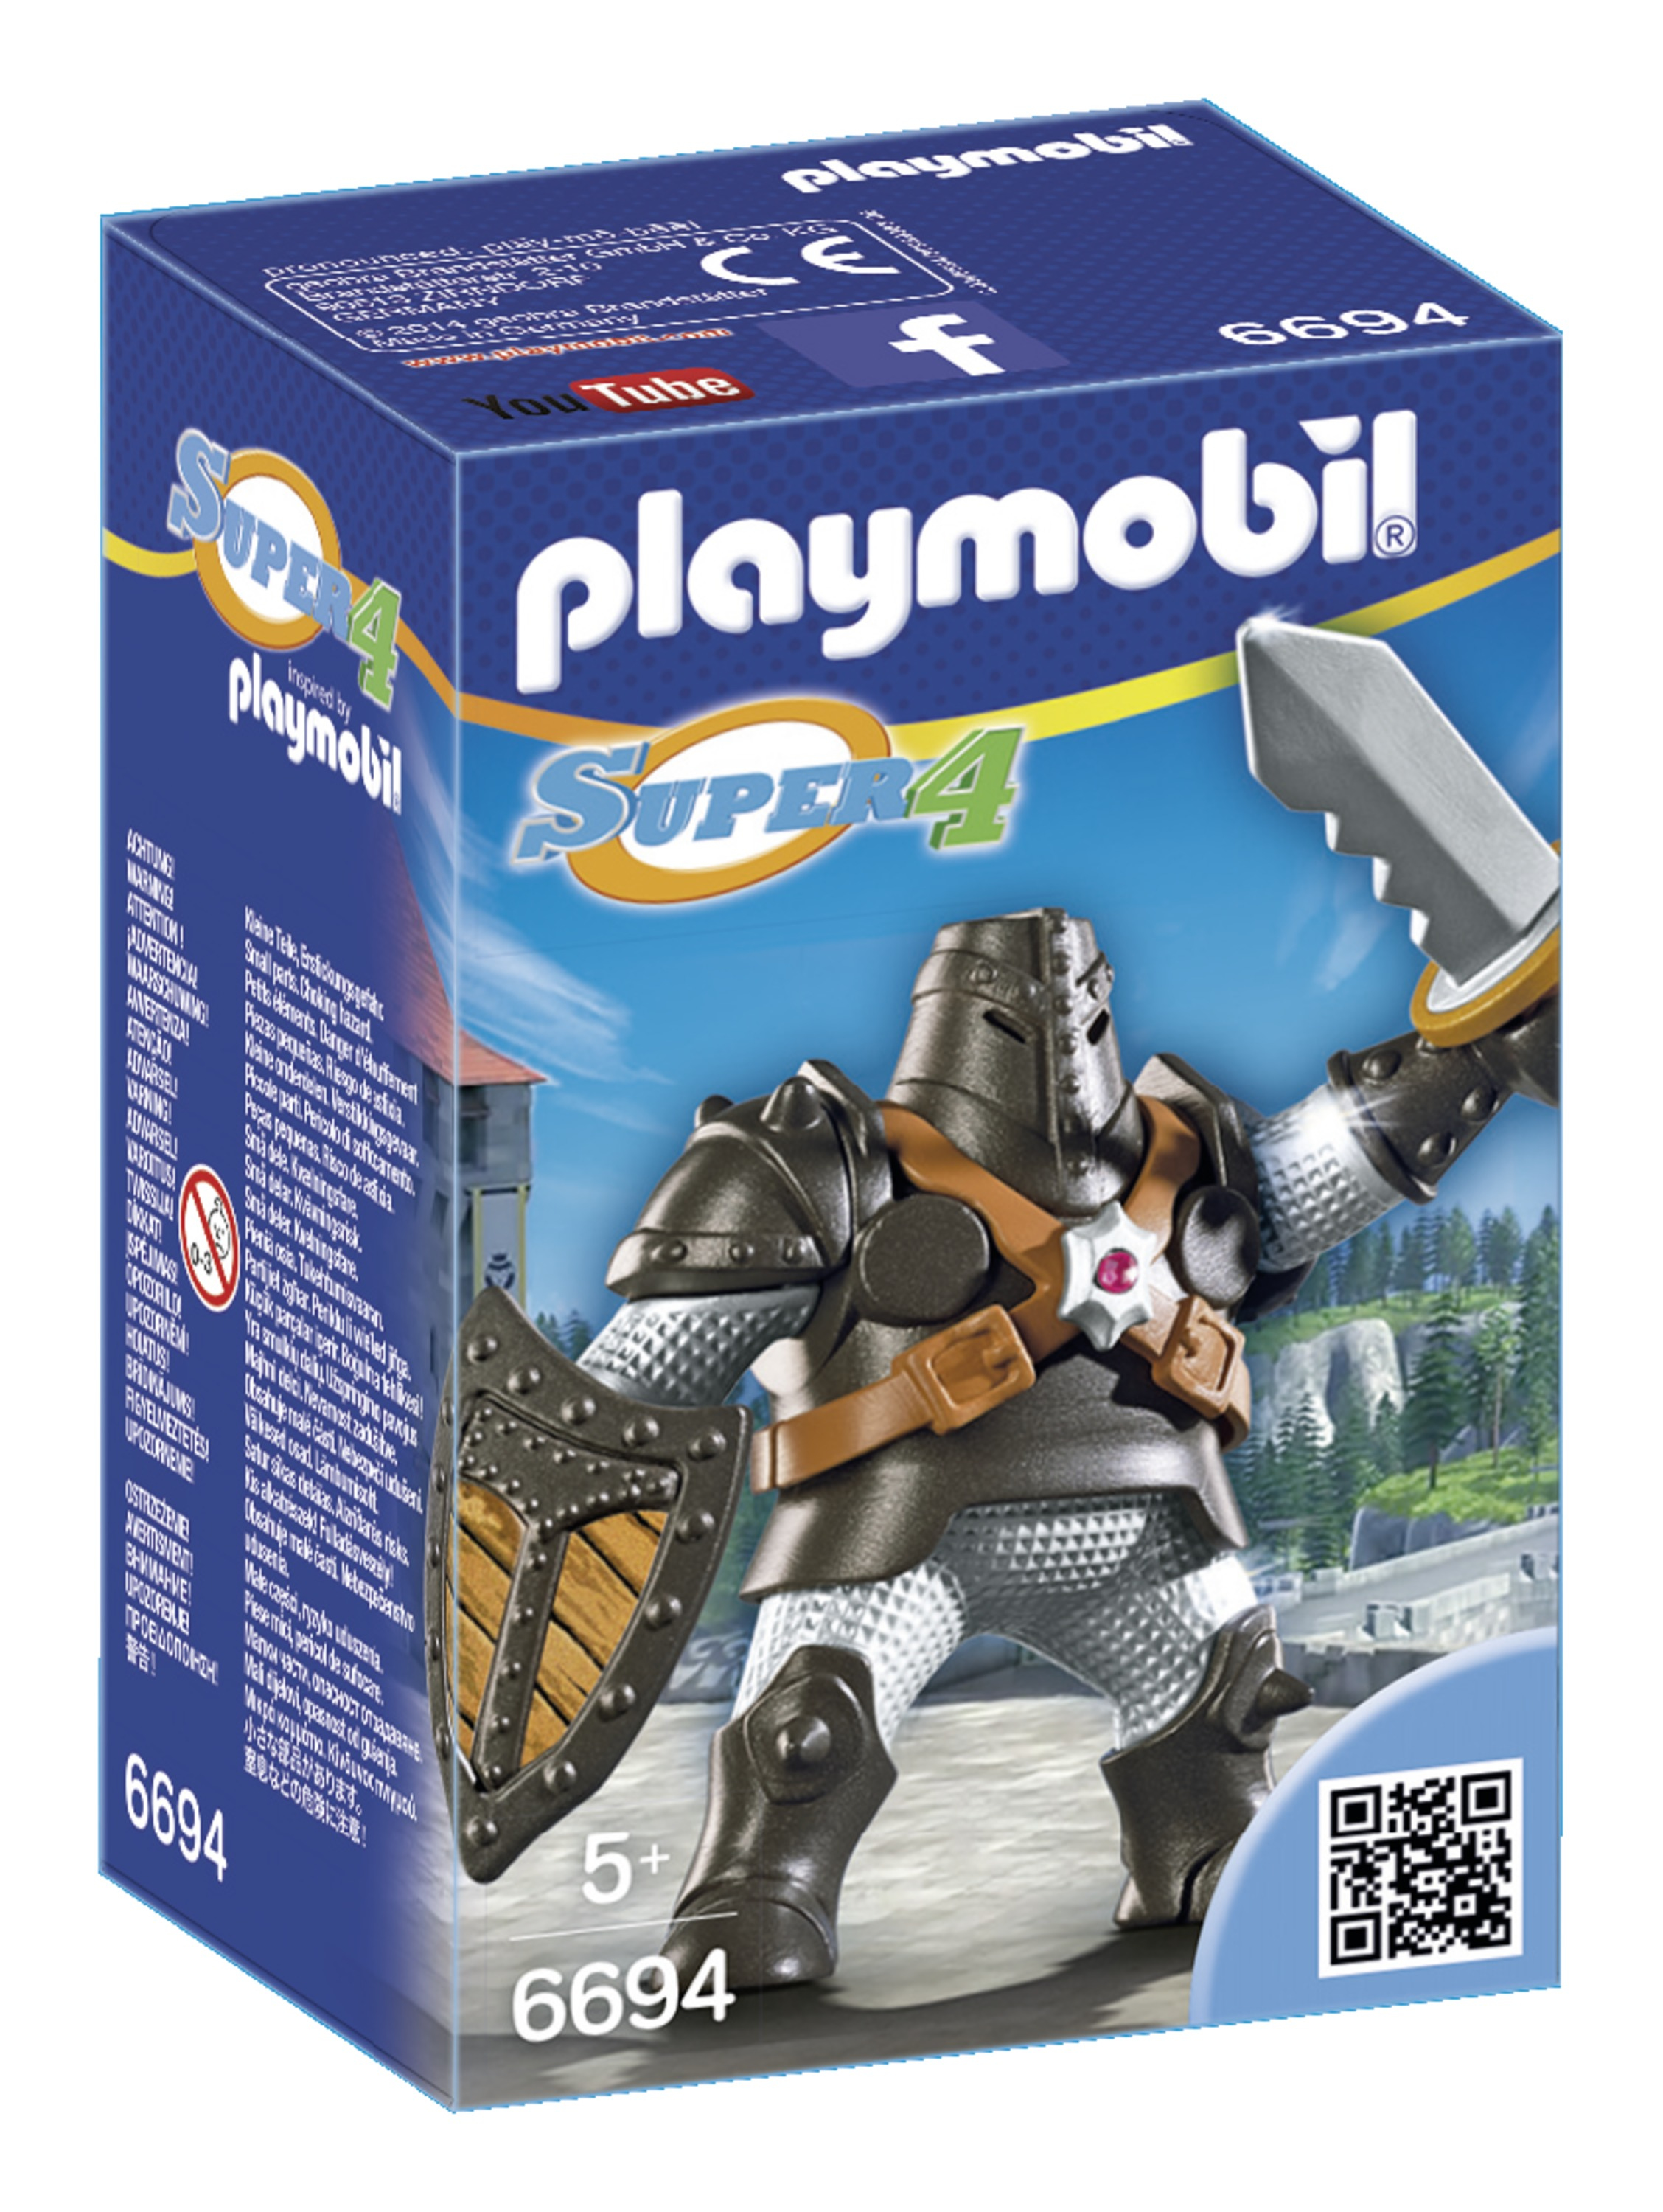 Maak leven Baffle Maak een bed Product data Playmobil Super 4 Black Colossus Toy Playsets (6694)